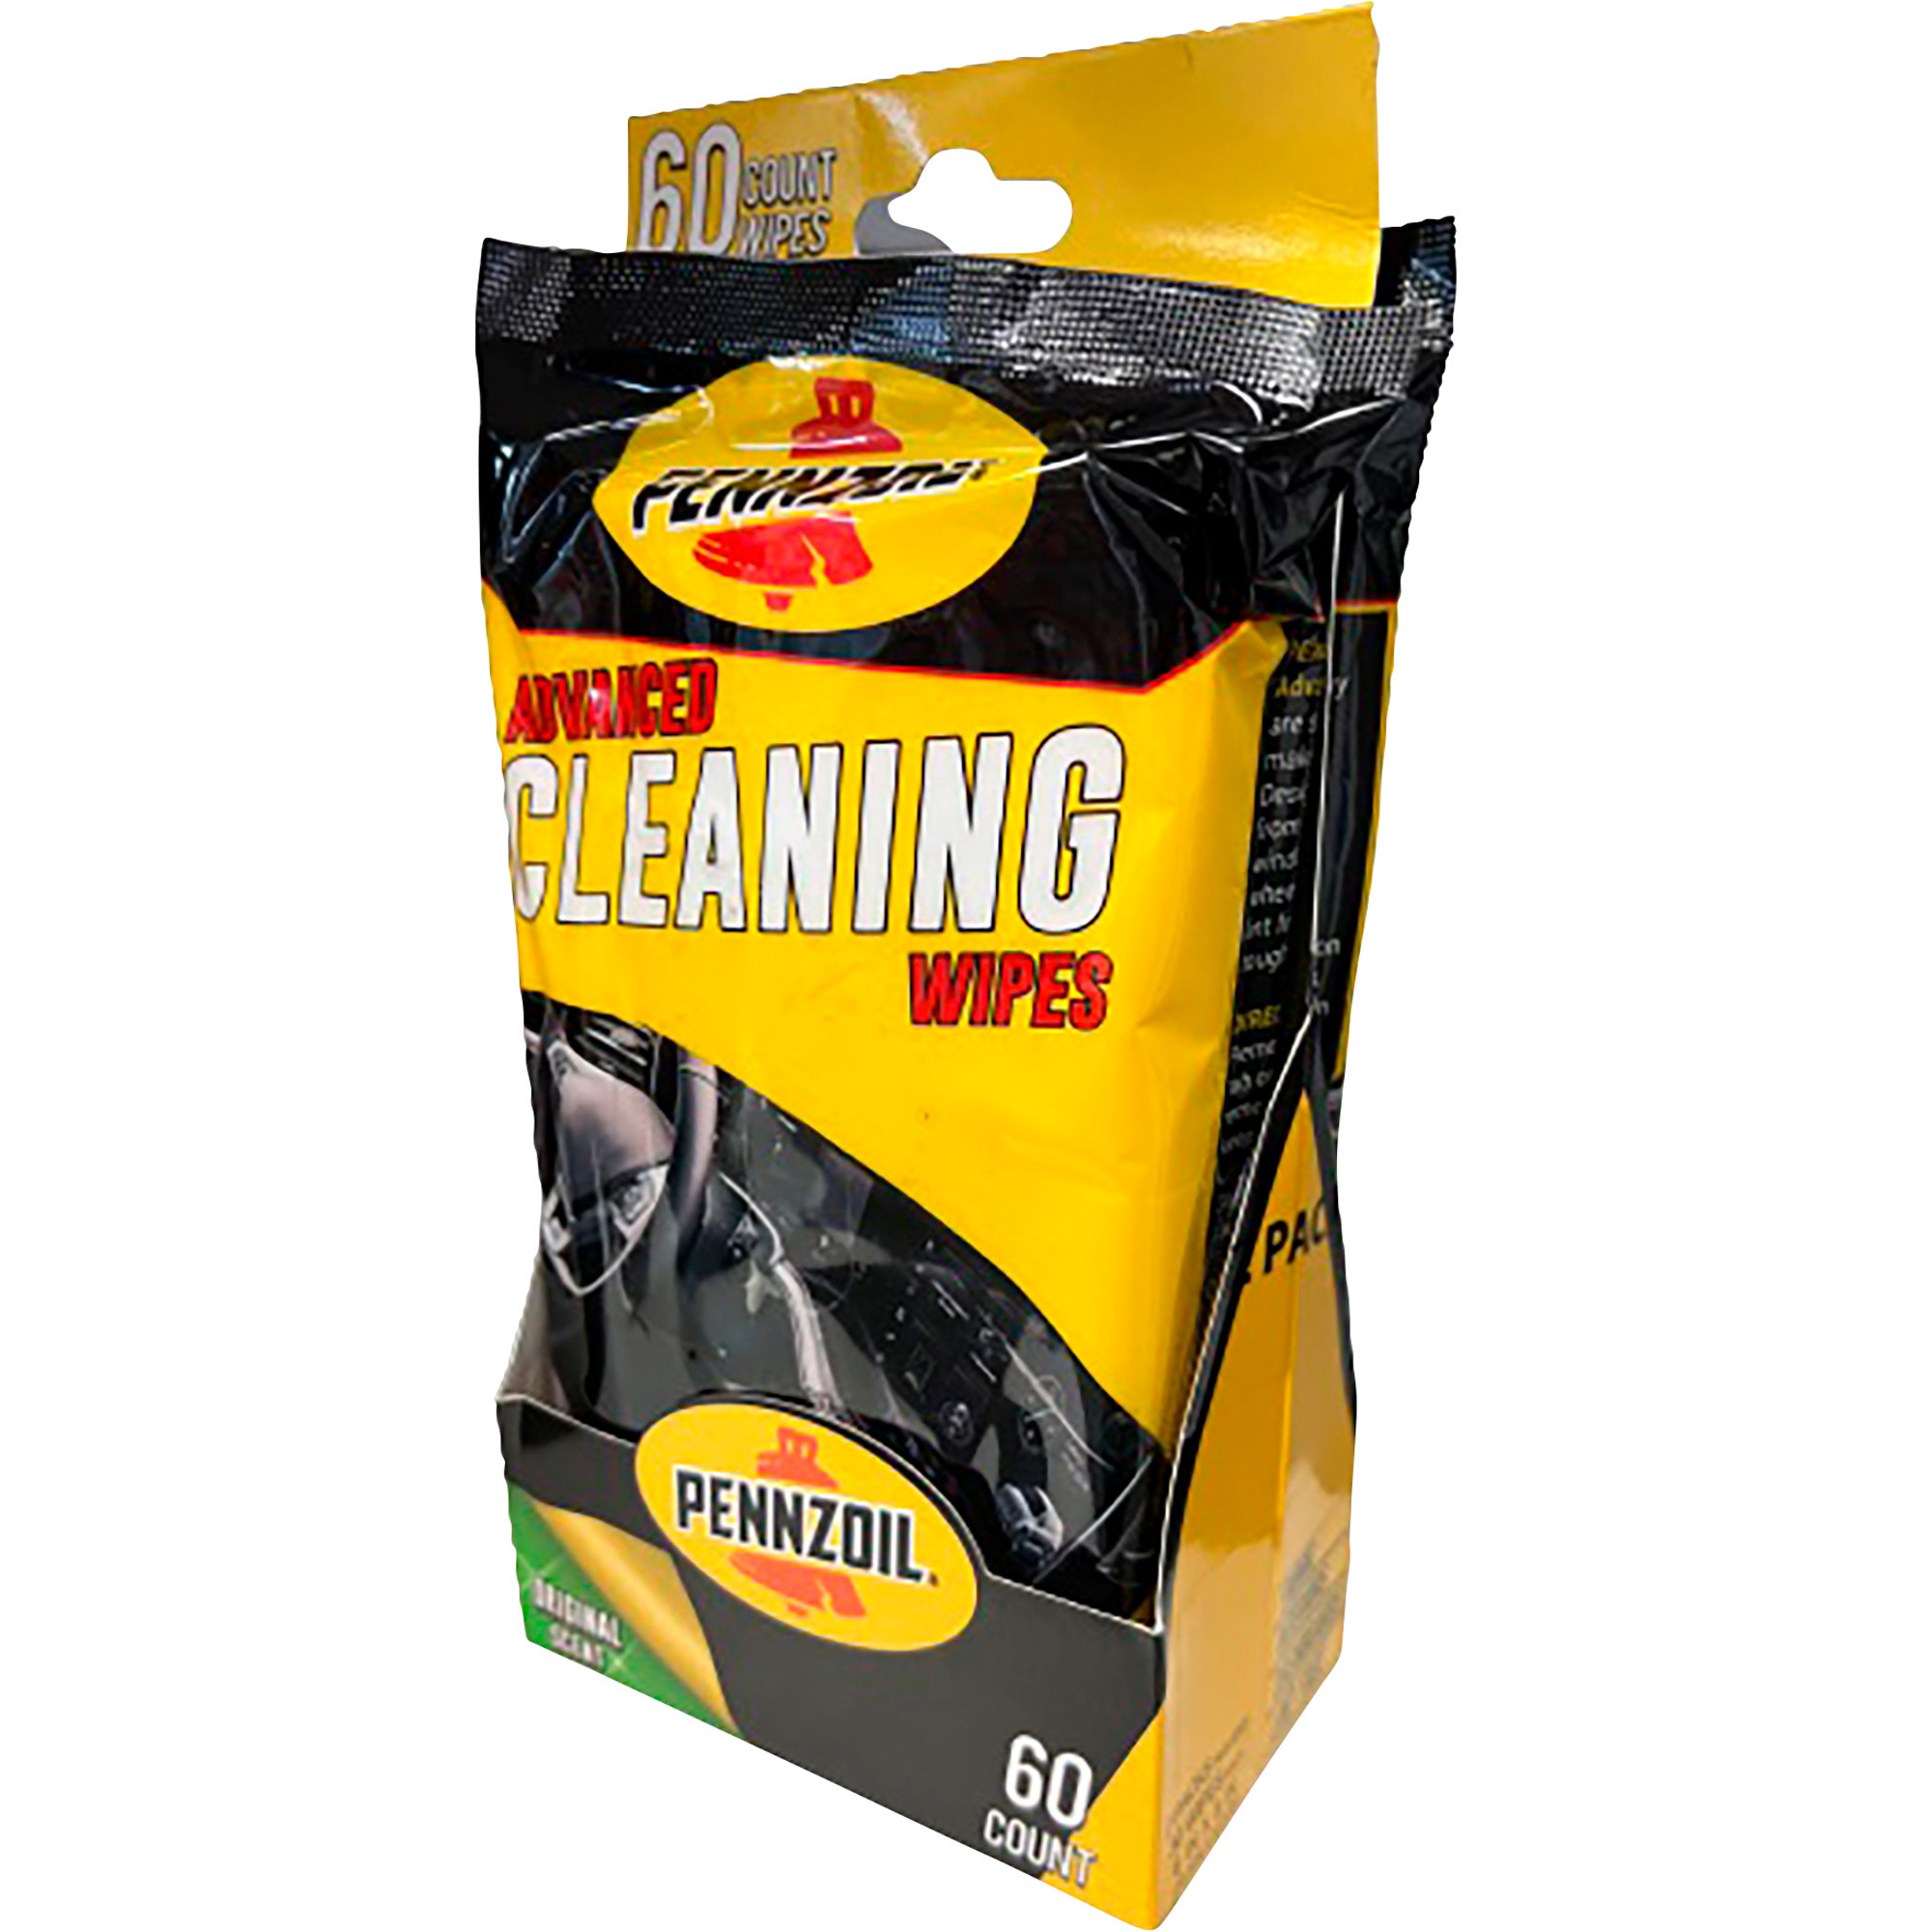 Pennzoil Car Interior Cleaning Wipes - Advanced Car Cleaning Supplies for Superior Car Cleaning, Efficient, and Effective Car CLEANER. 30-Count